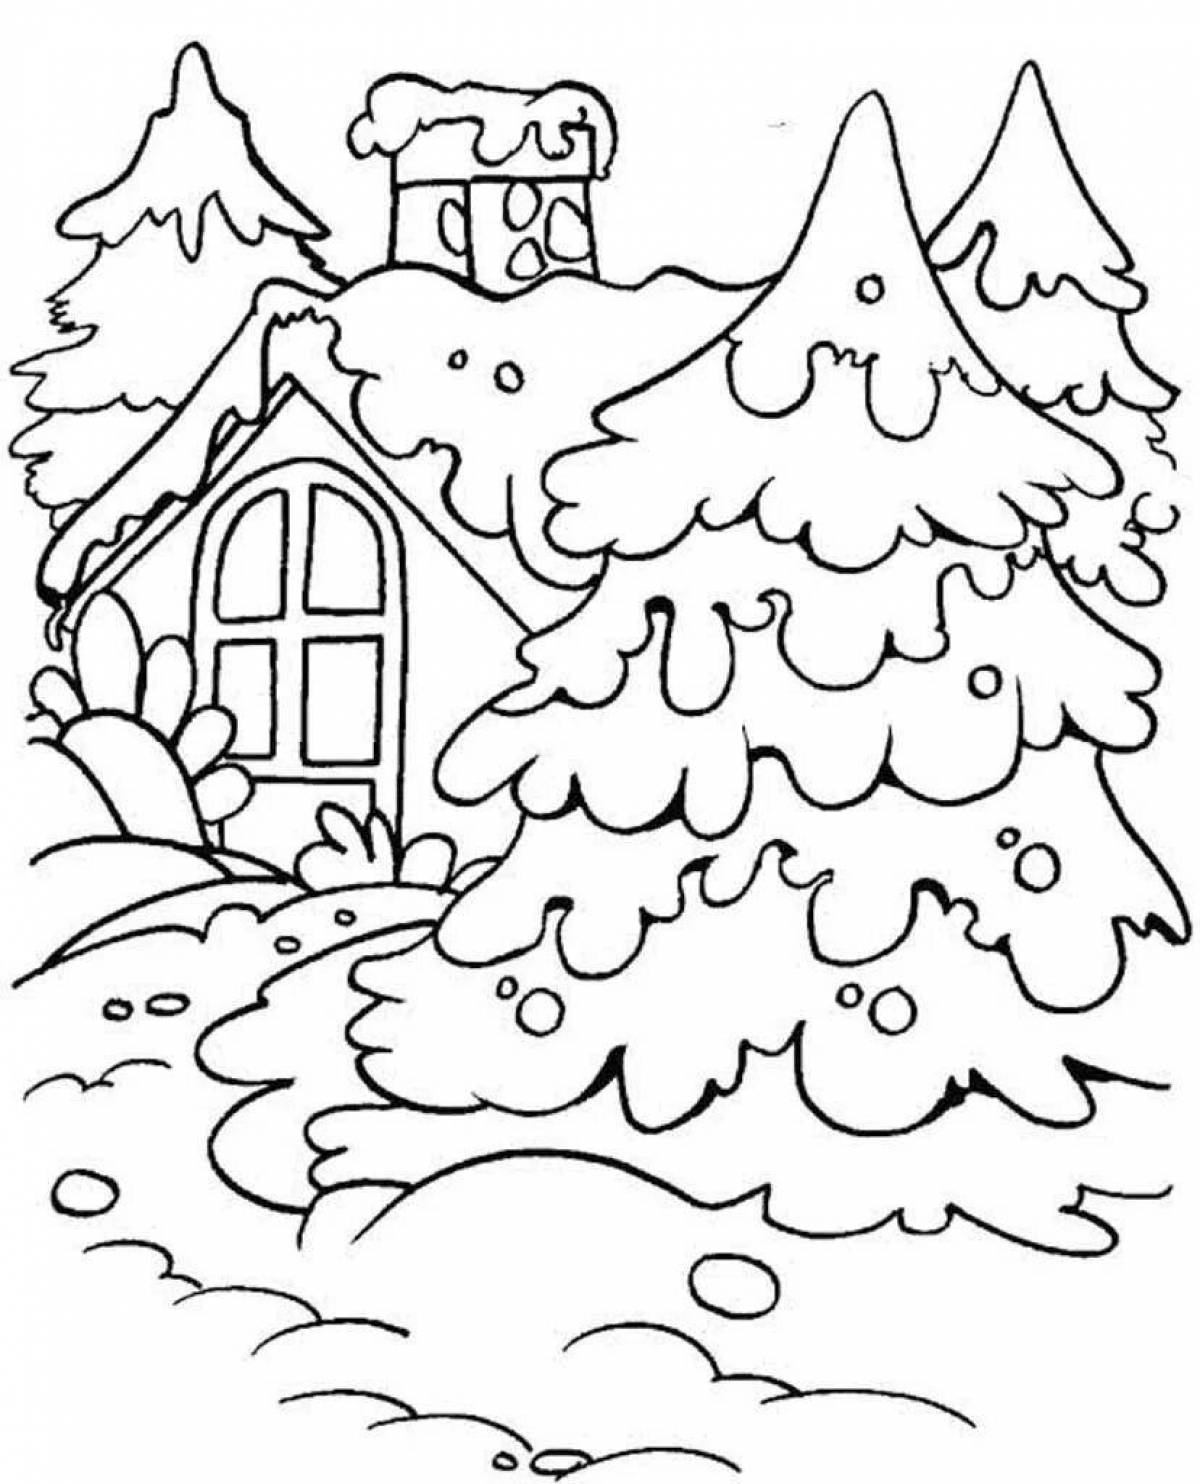 Bright winter landscape coloring book for children 6-7 years old